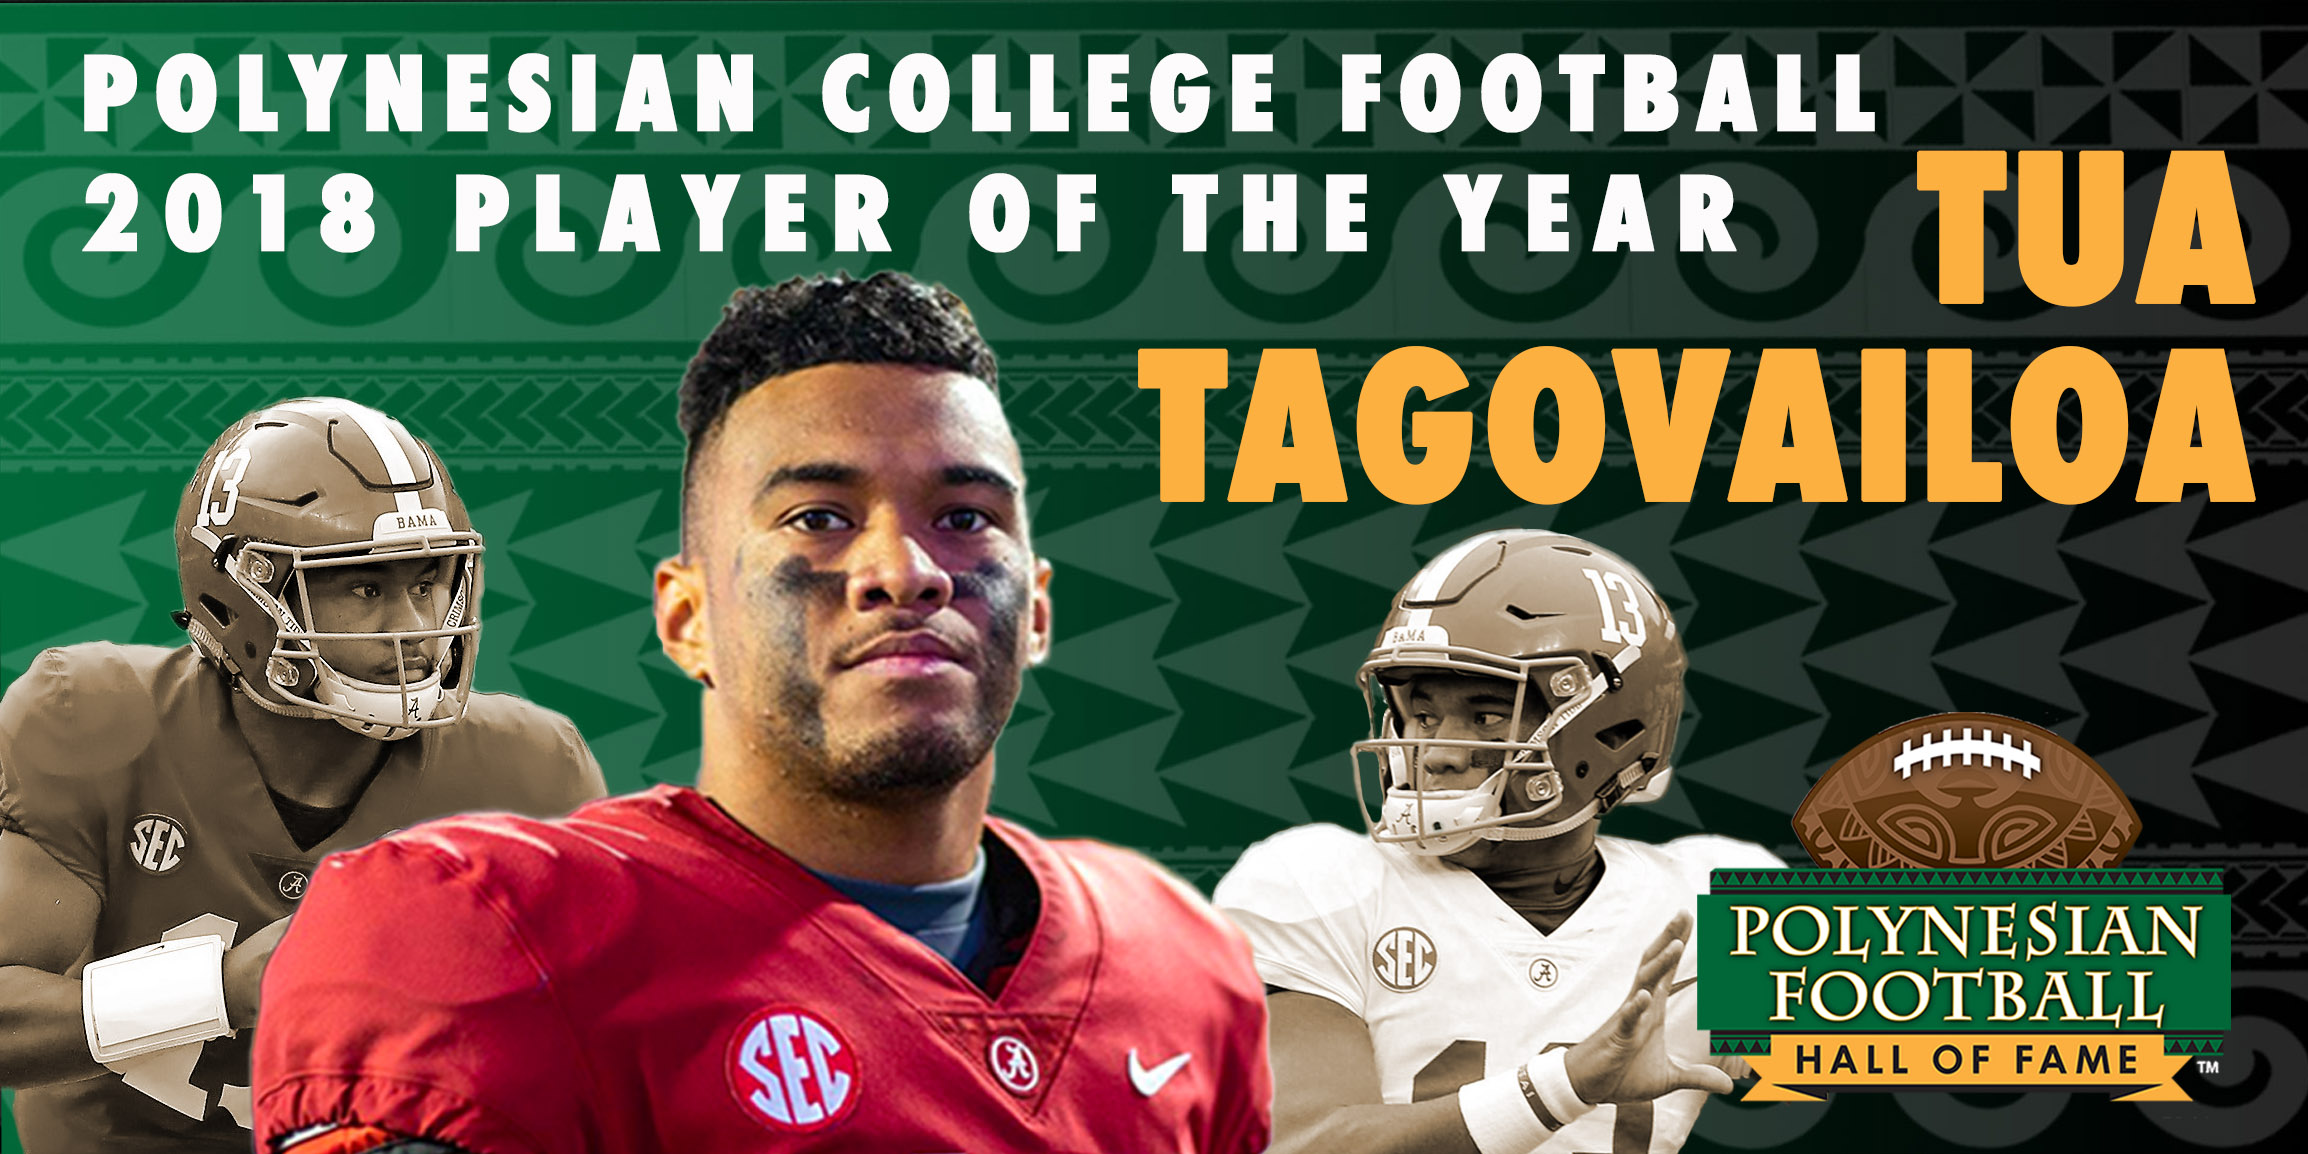 Tua Tagovailoa honors his Polynesian roots at 2018 College Football Player of the Year event